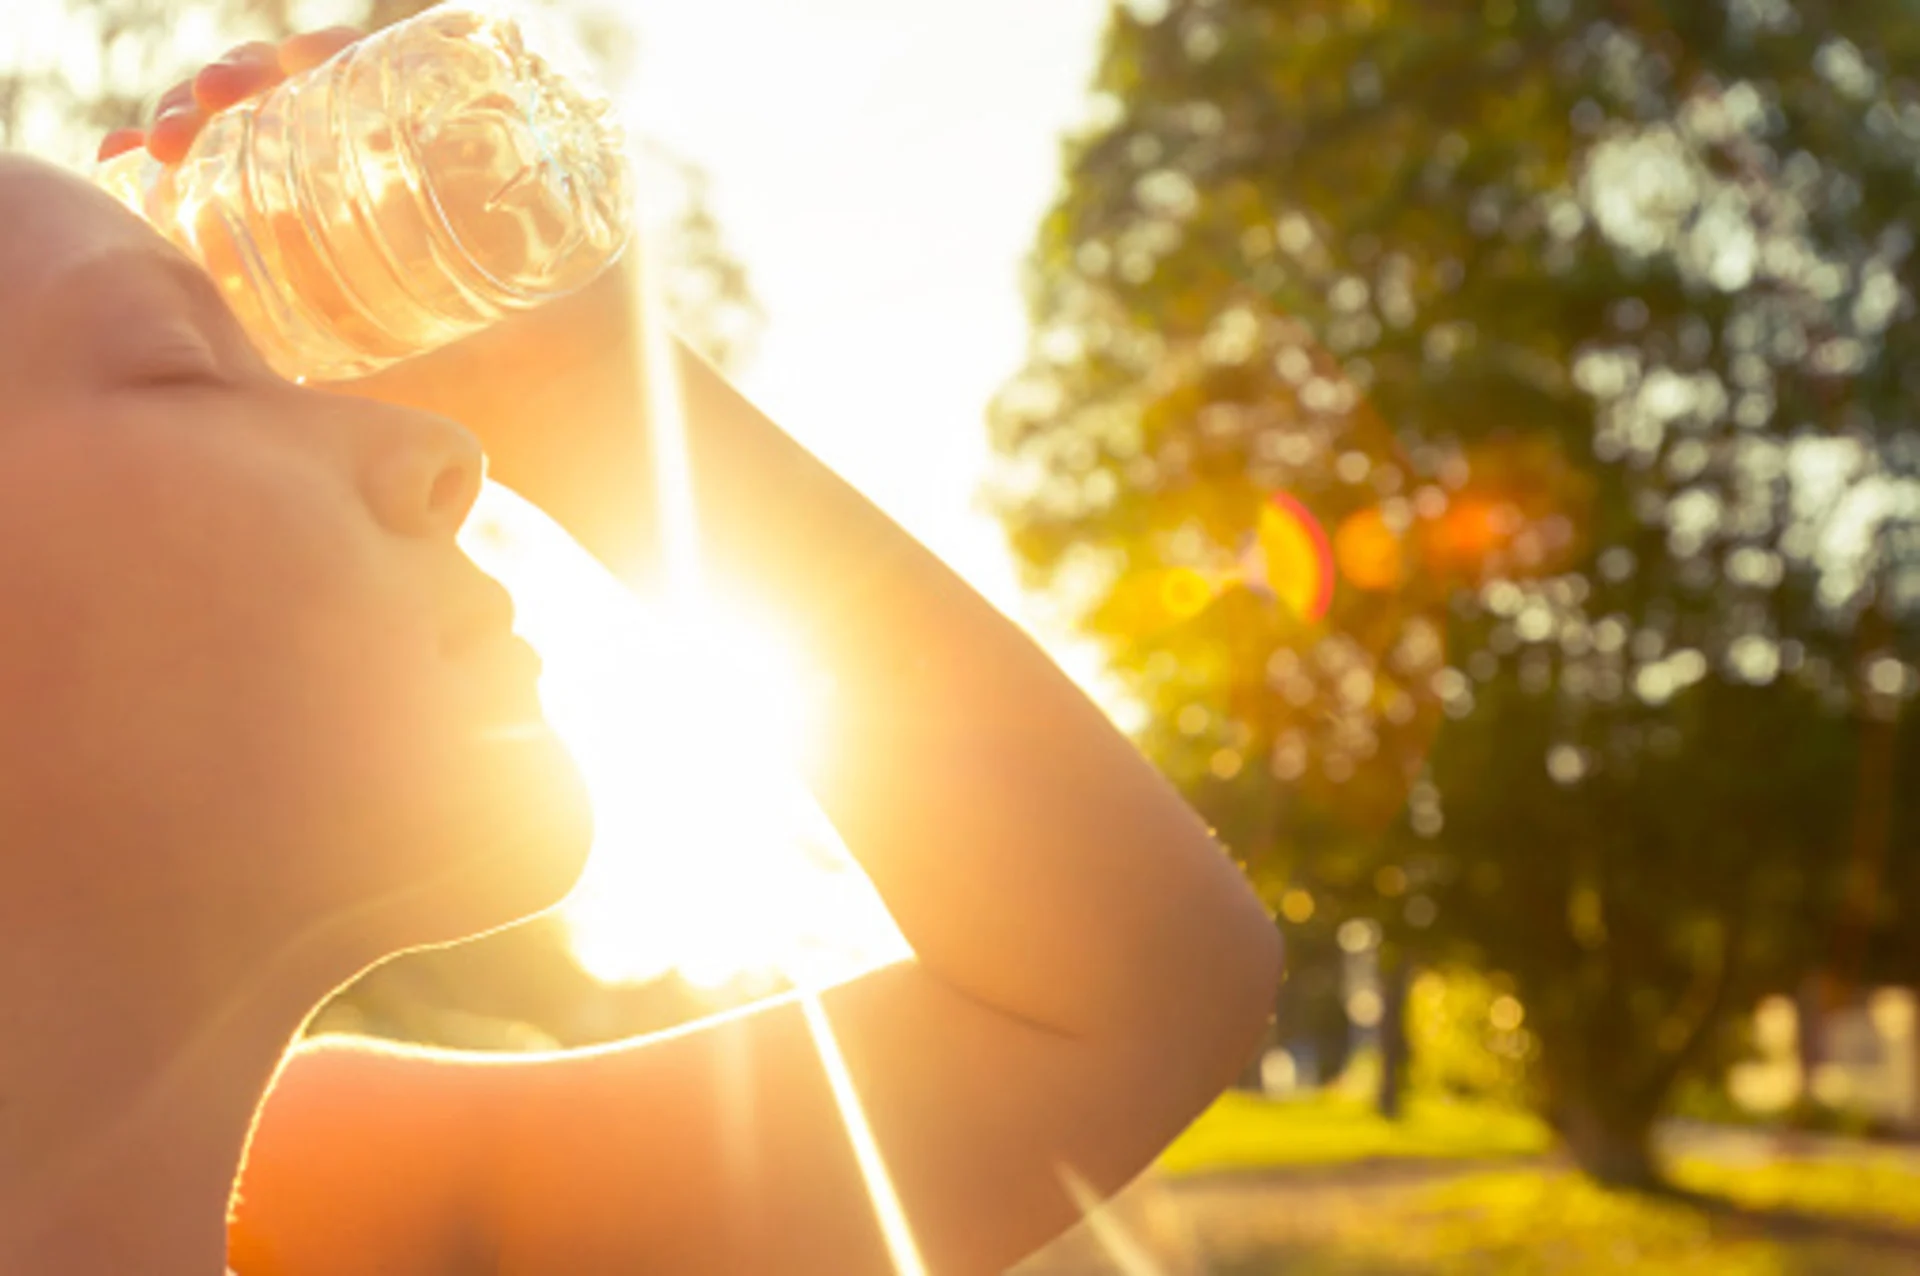 Heat waves can damage organs, new study suggests